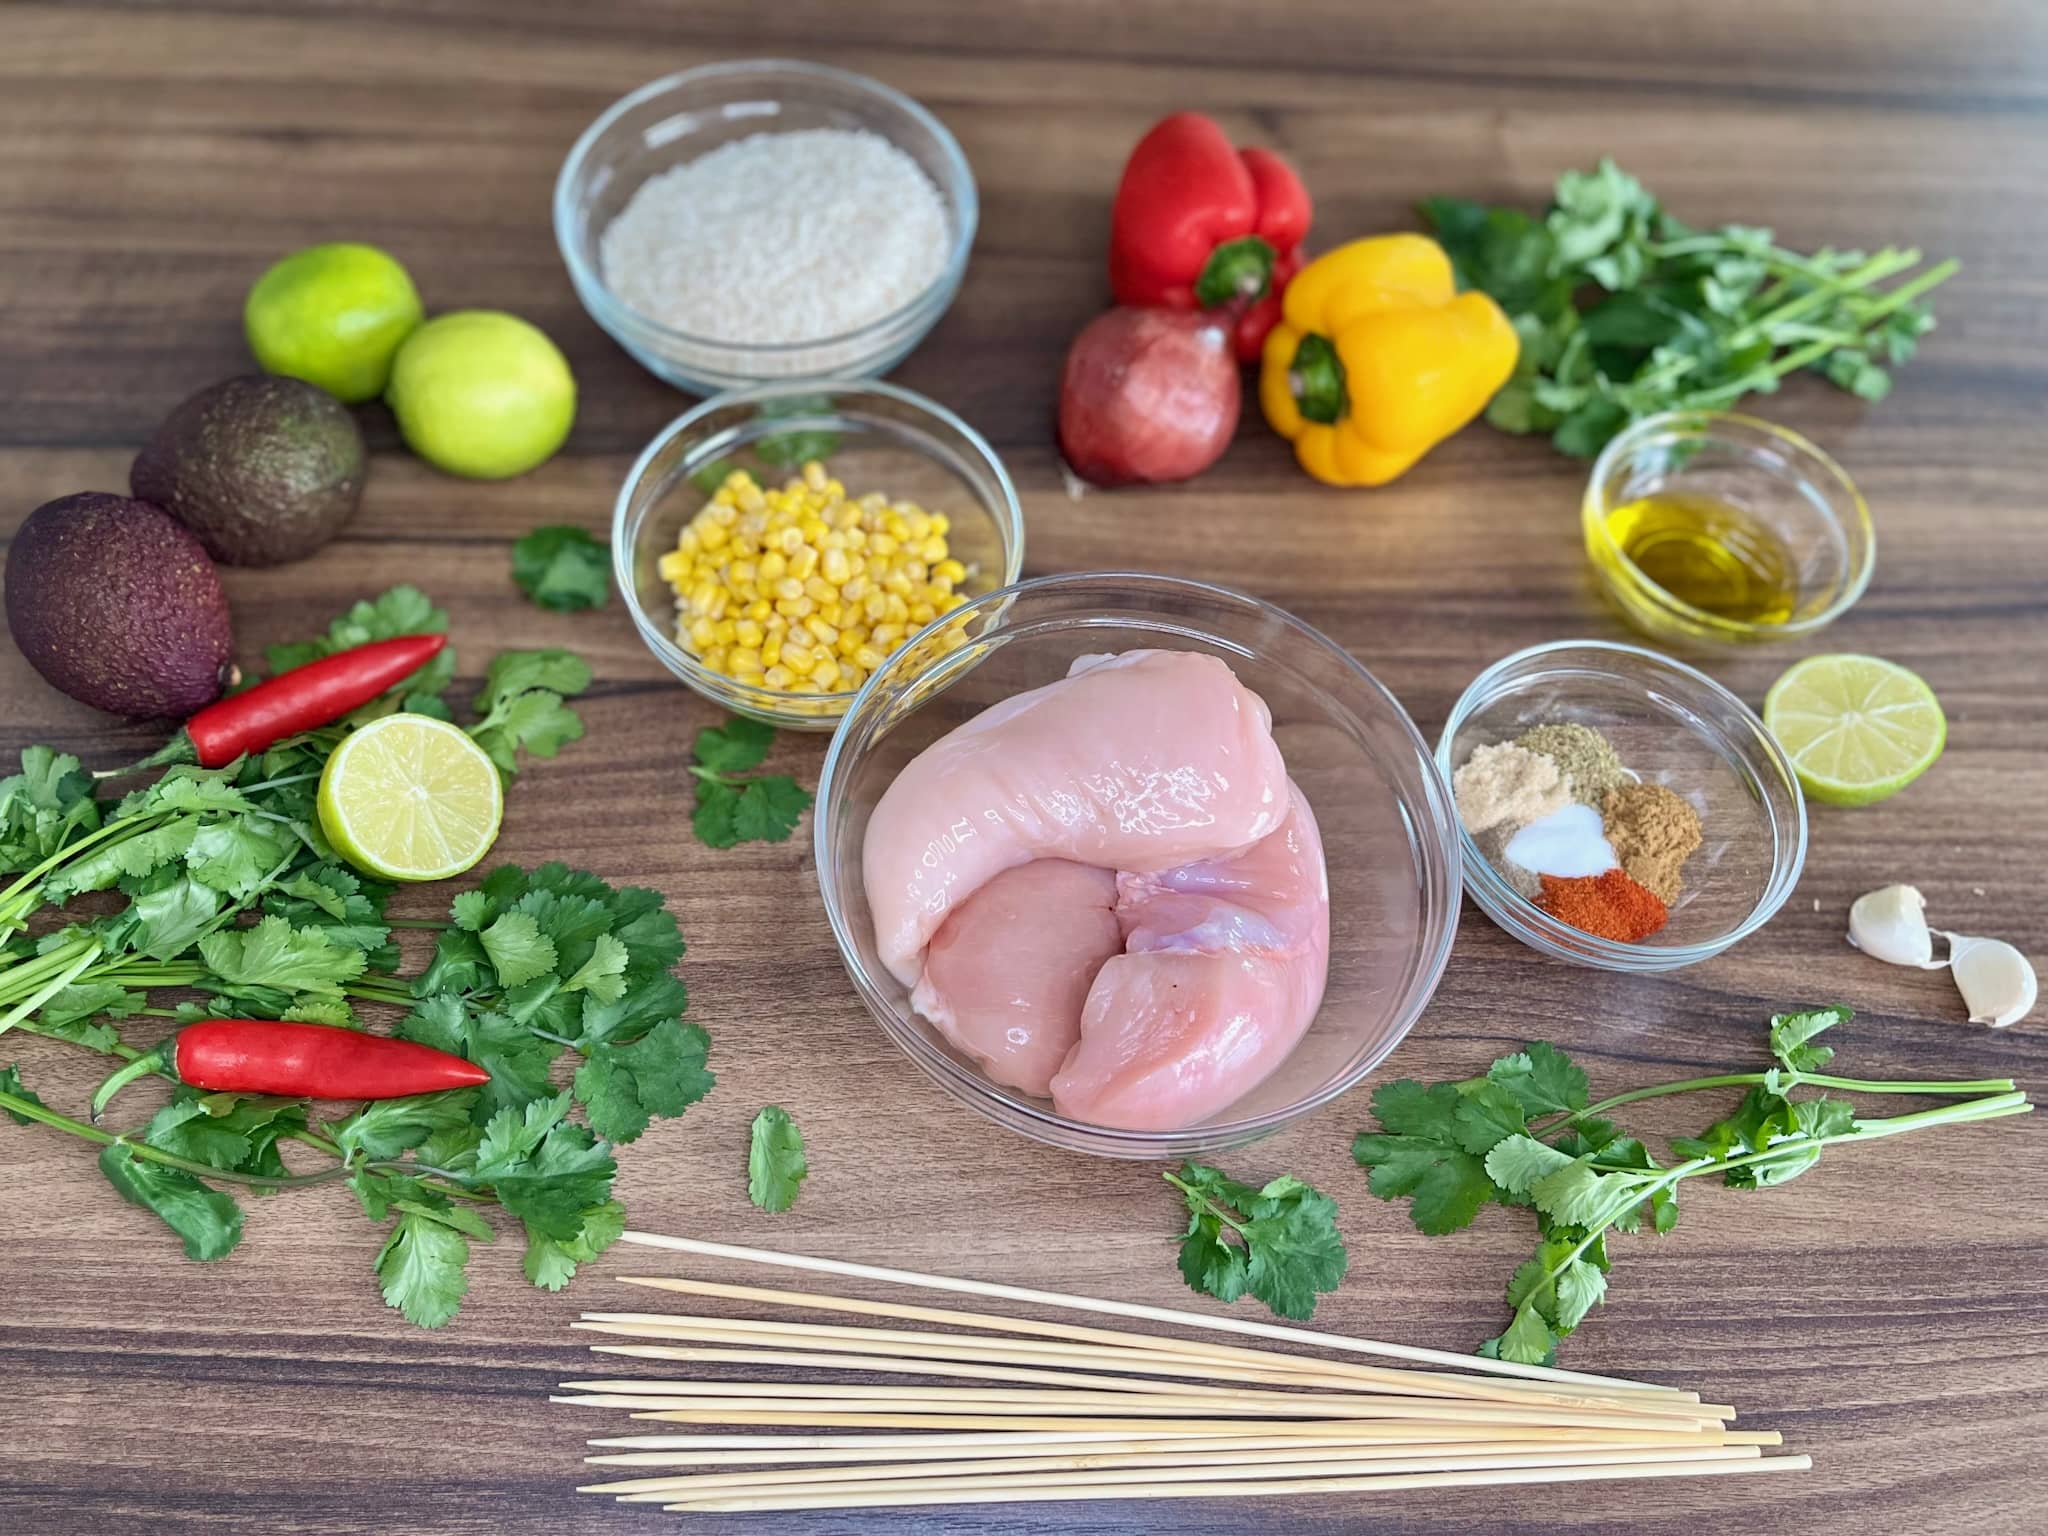 All the ingredients are laid out on the table, ready for making Mexican-Style Skewers